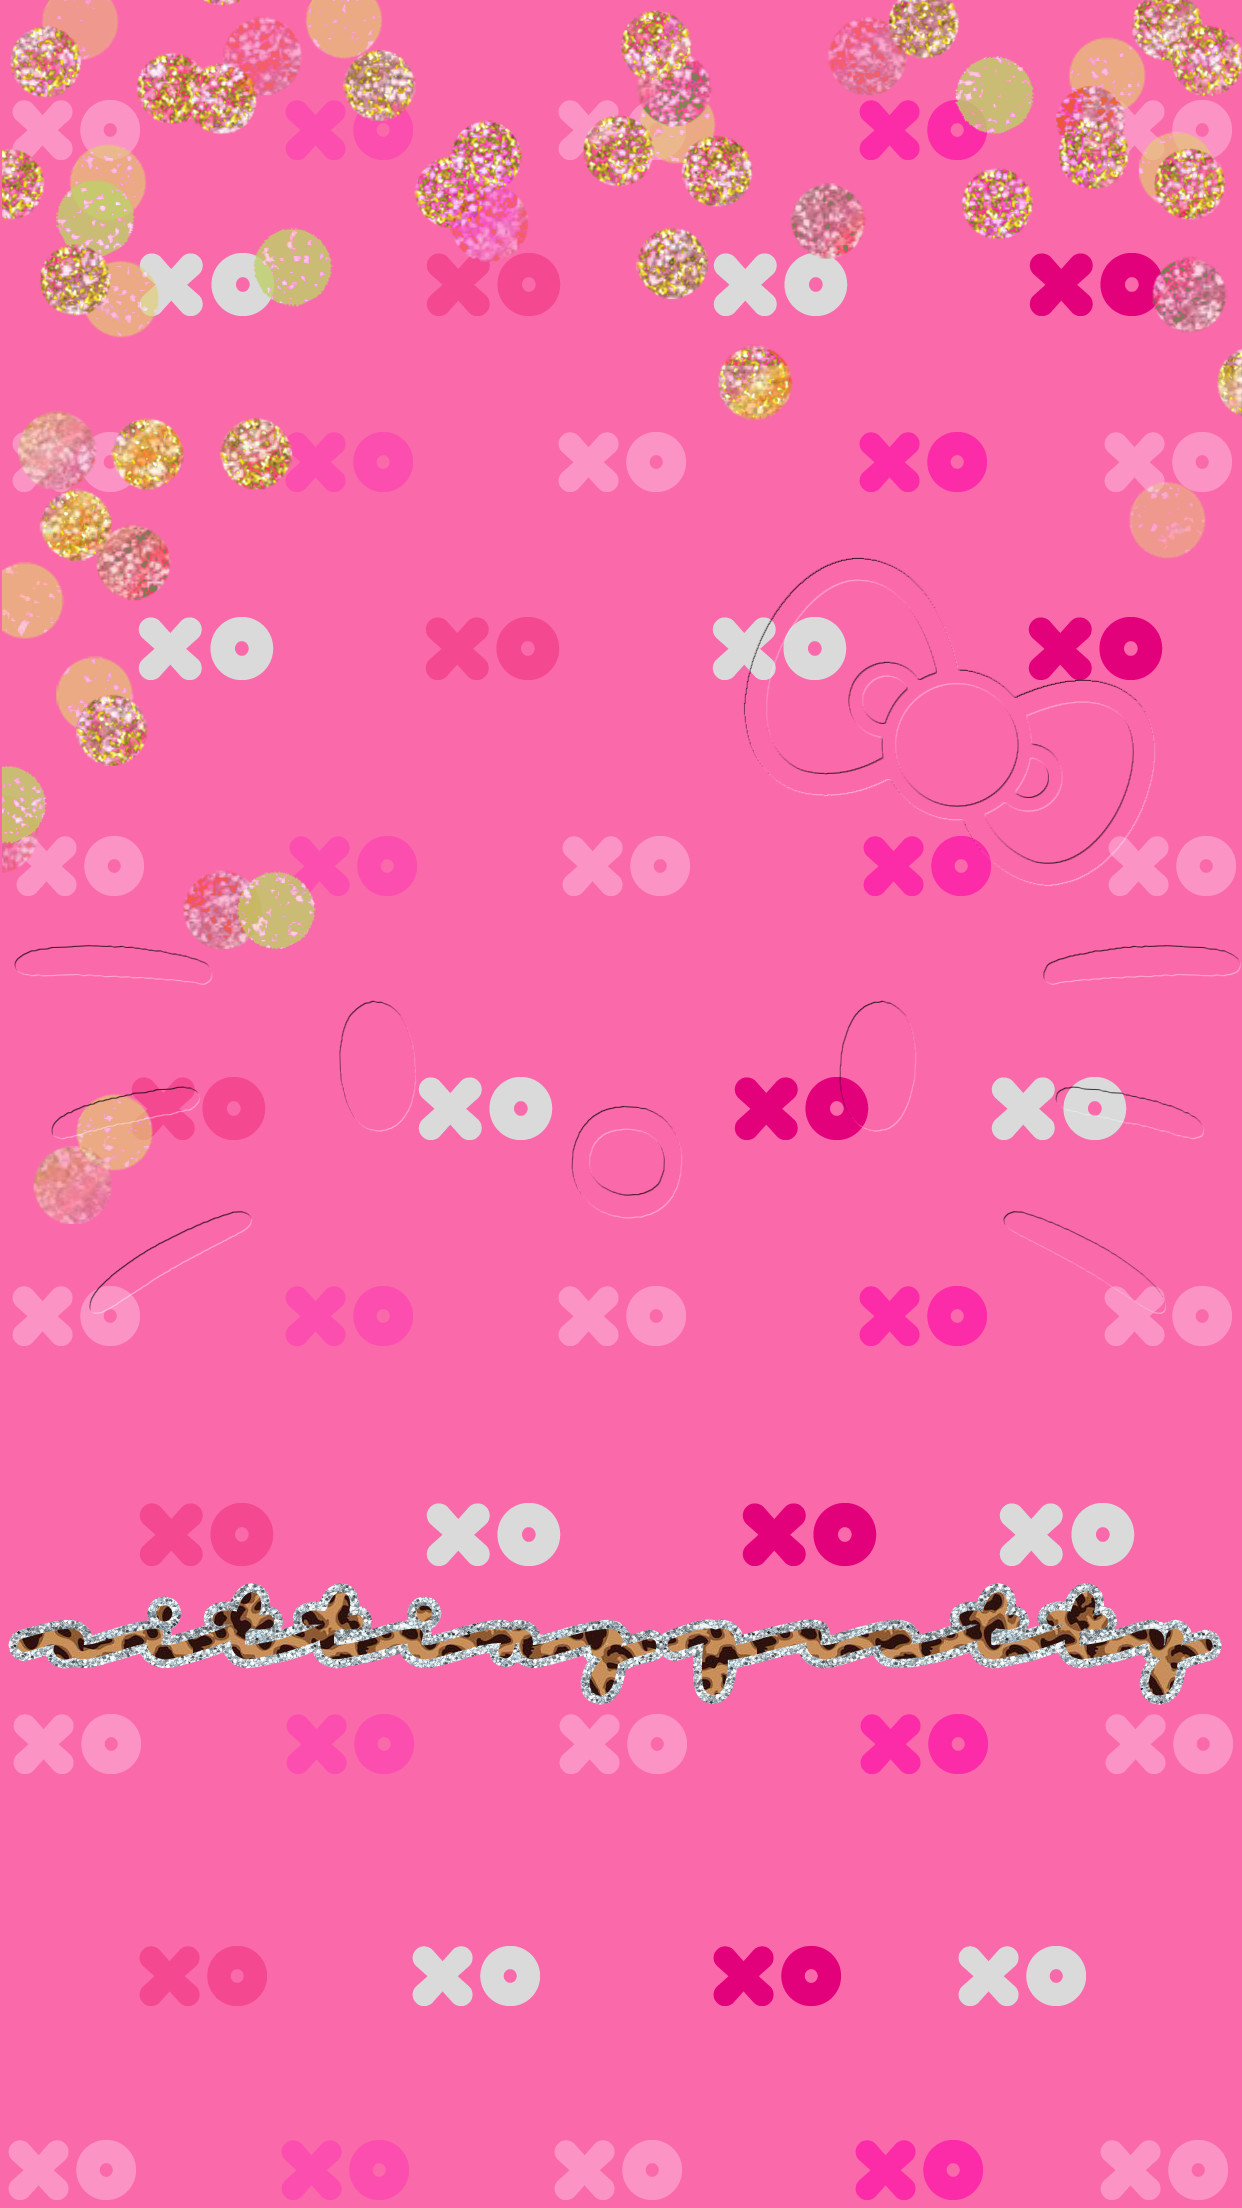 1242x2208 Glitter Wallpaper, Wallpaper Backgrounds, Iphone Wallpapers, Hello Kitty  Wallpaper, Mobile Phones, Homemade Cards, Android, Kawaii, Wallpapers